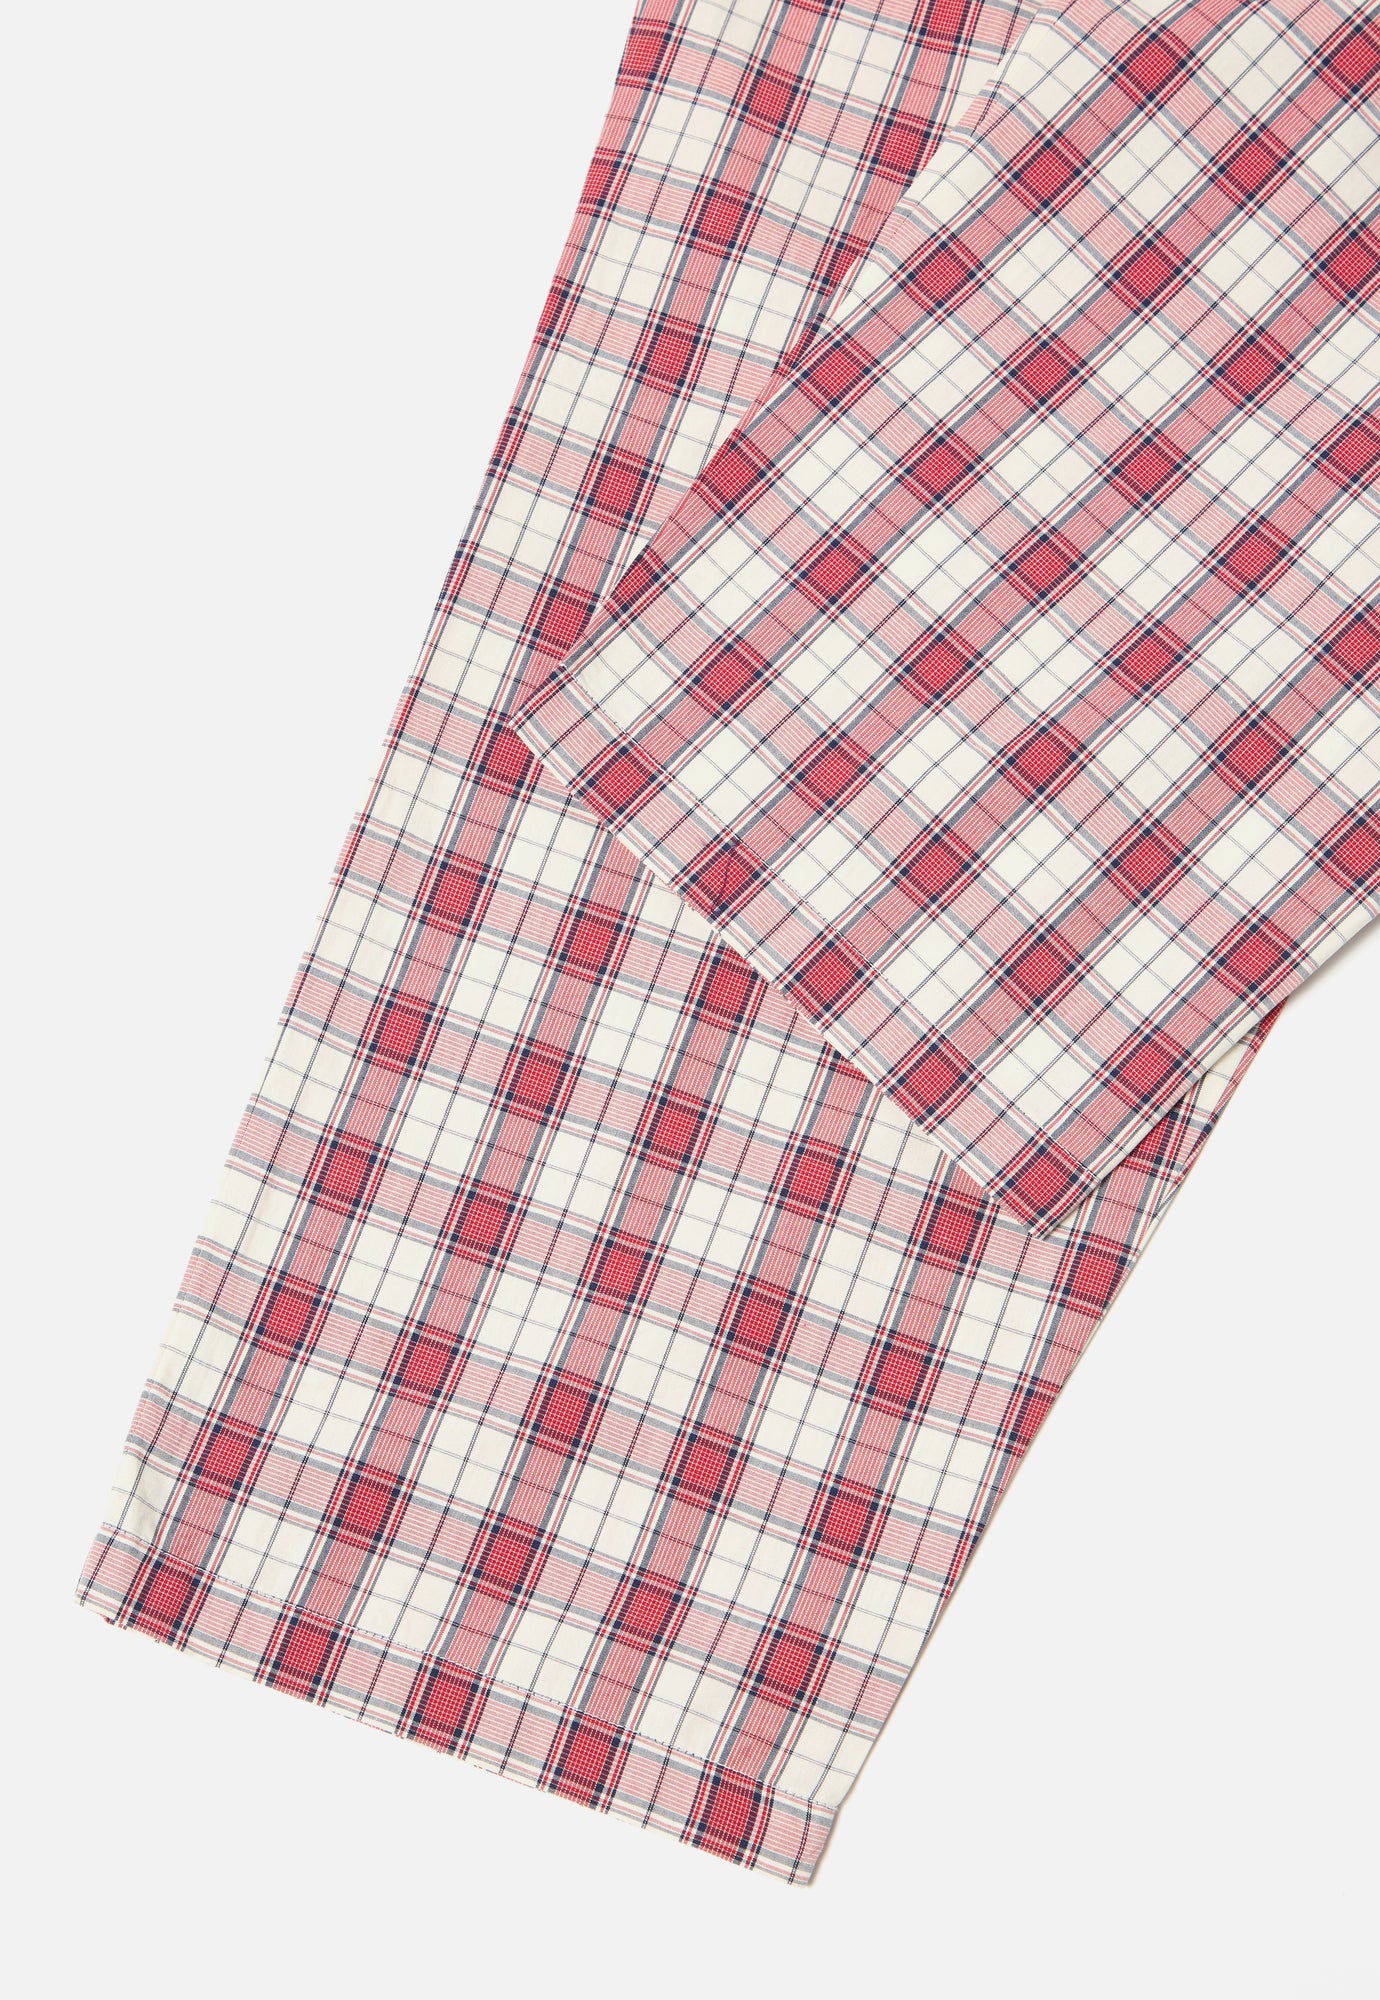 Universal Works Pyjama in Red Cotton Check